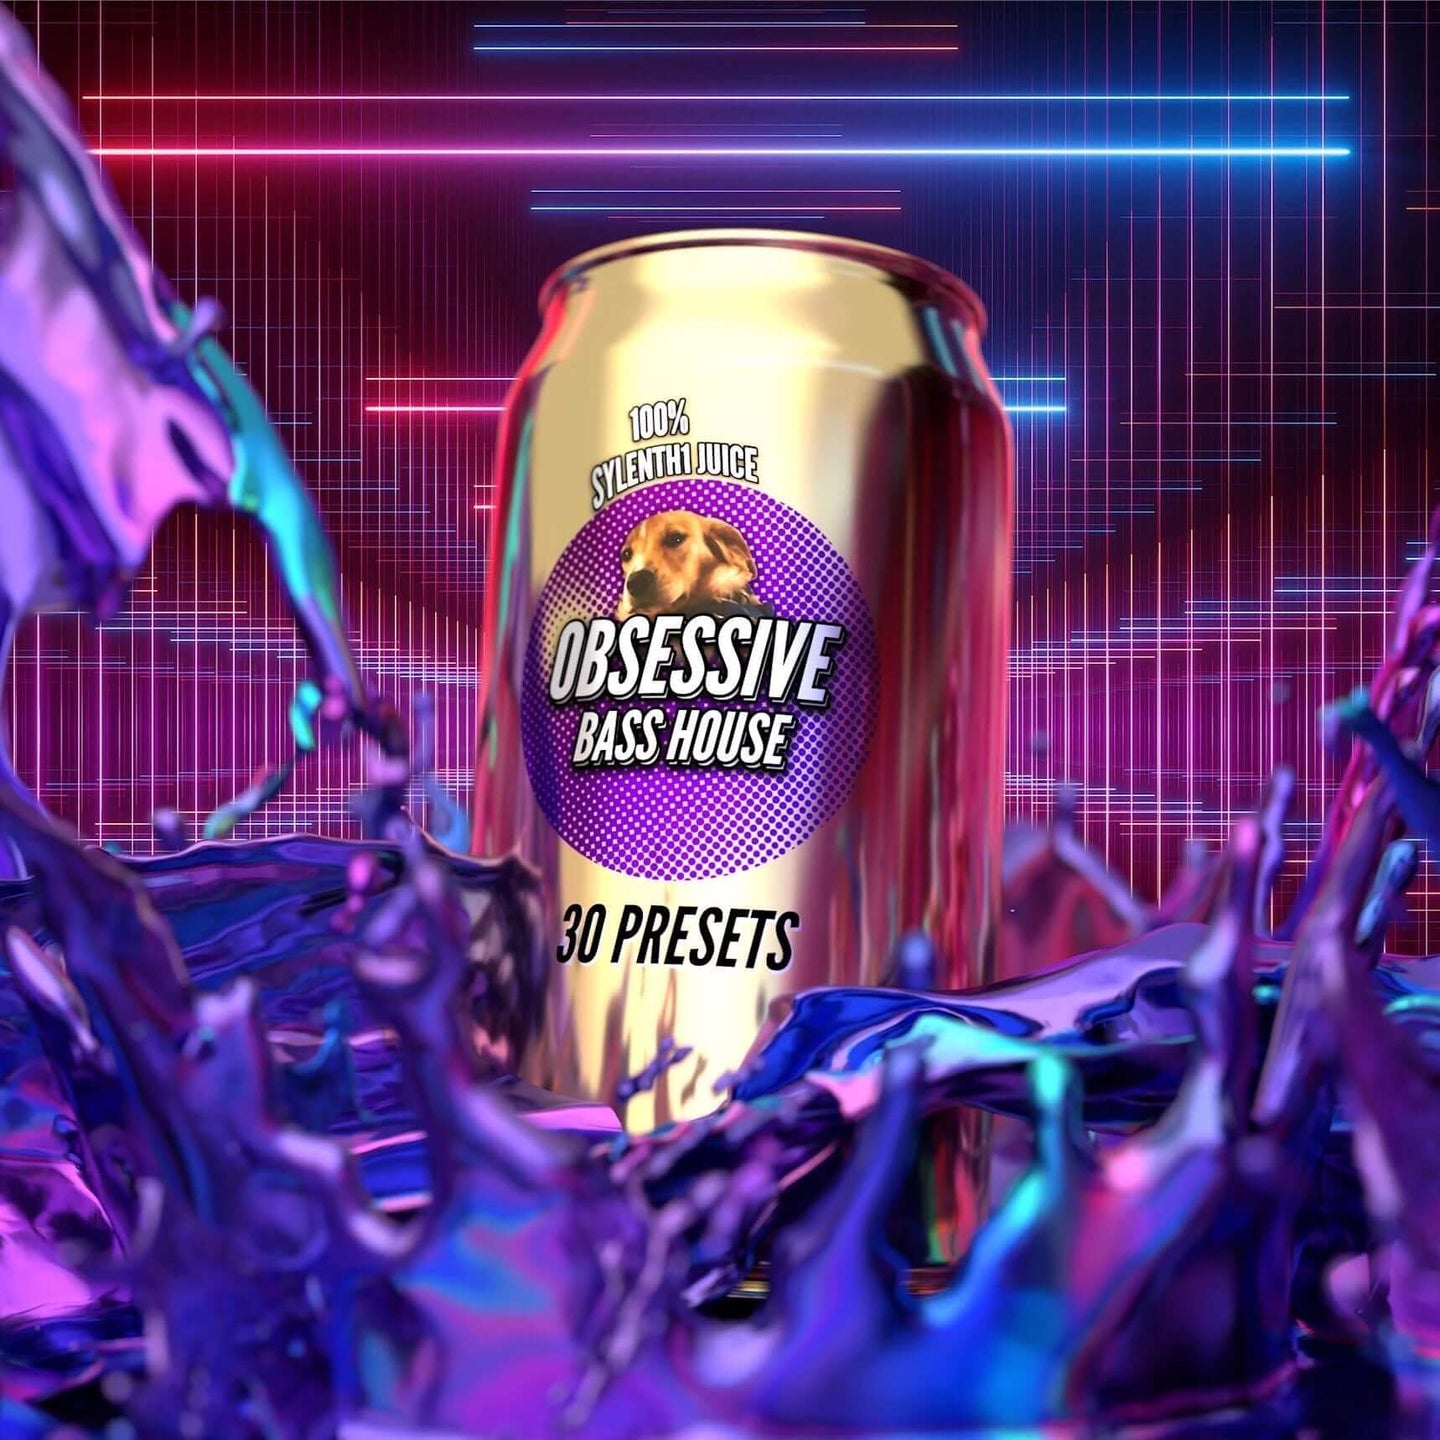 OUT NOW! OBSESSIVE BASS HOUSE VOL. 1 - PRESETS FOR SYLENTH1 - BRODUCER by EDWAN - Best EDM FLPs, sample packs & Broducer merch